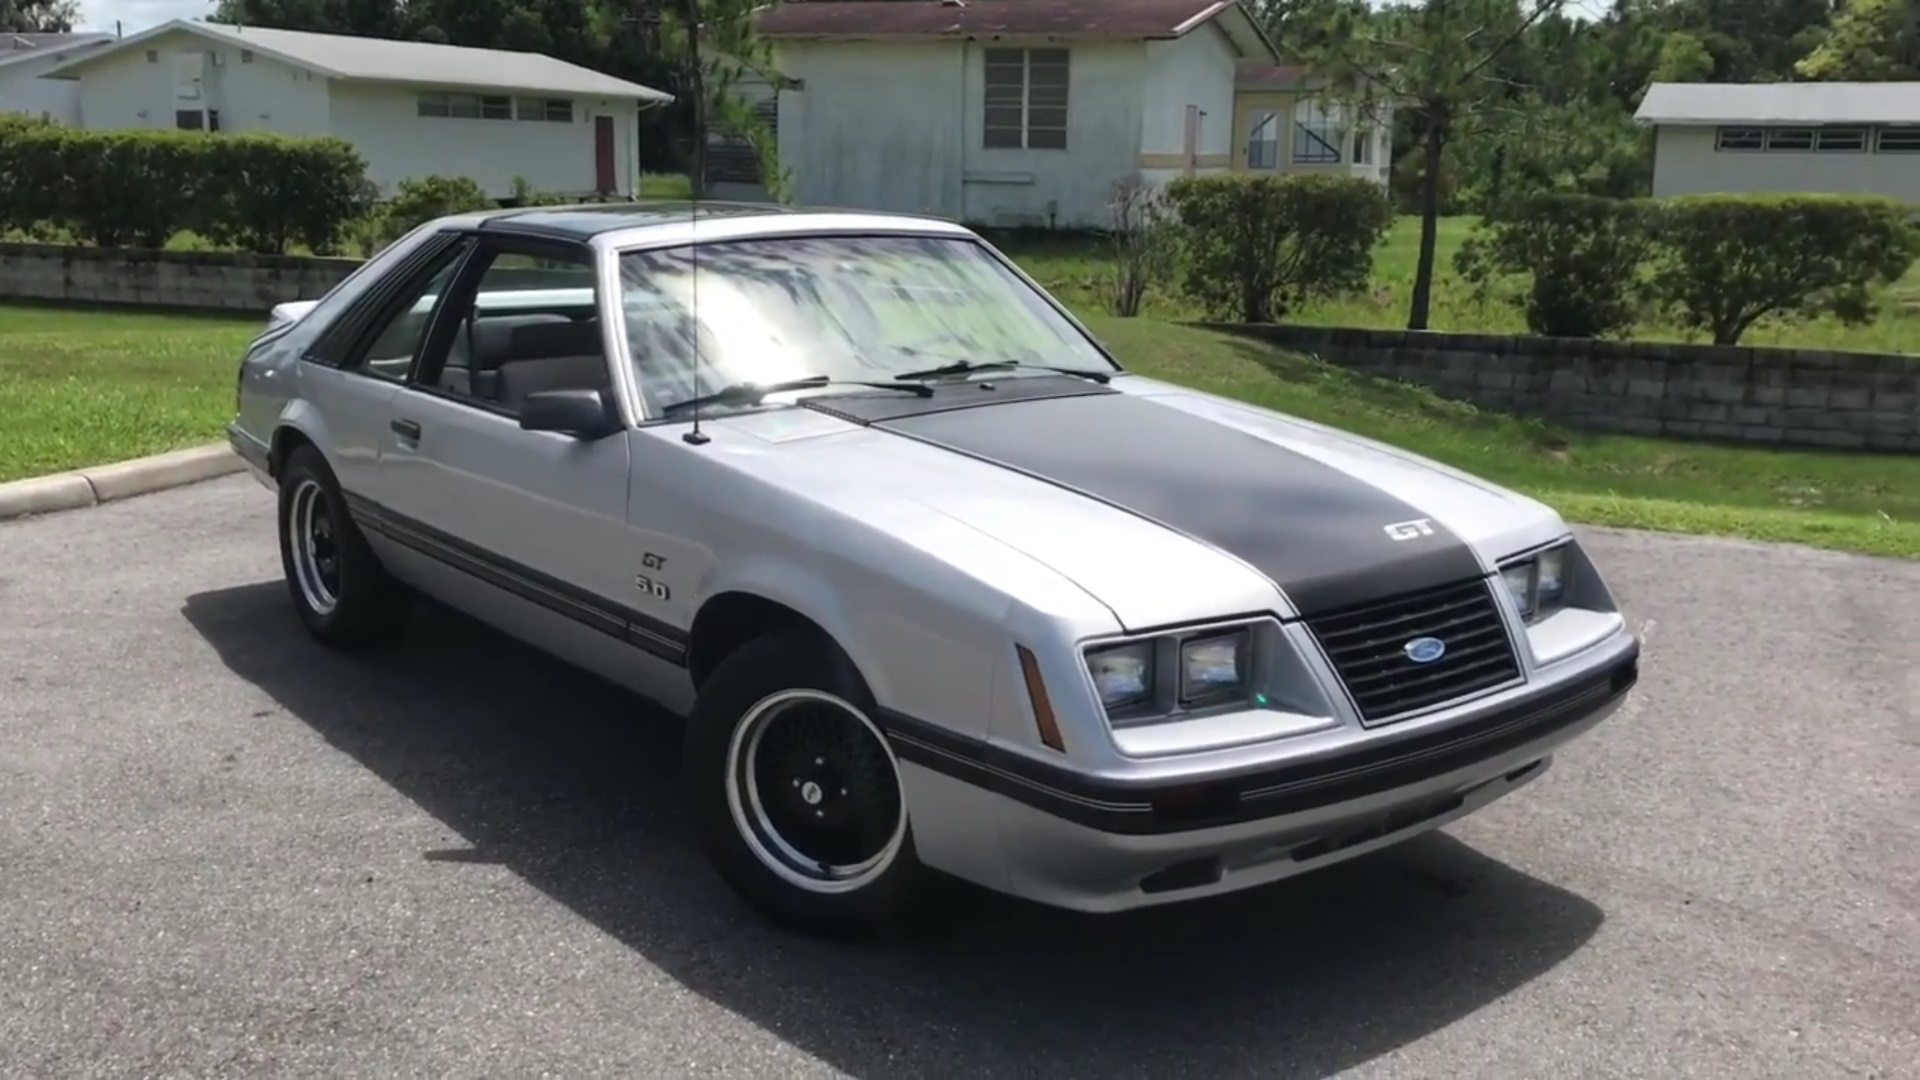 Video: All Original 1984 Ford Mustang GT Overview